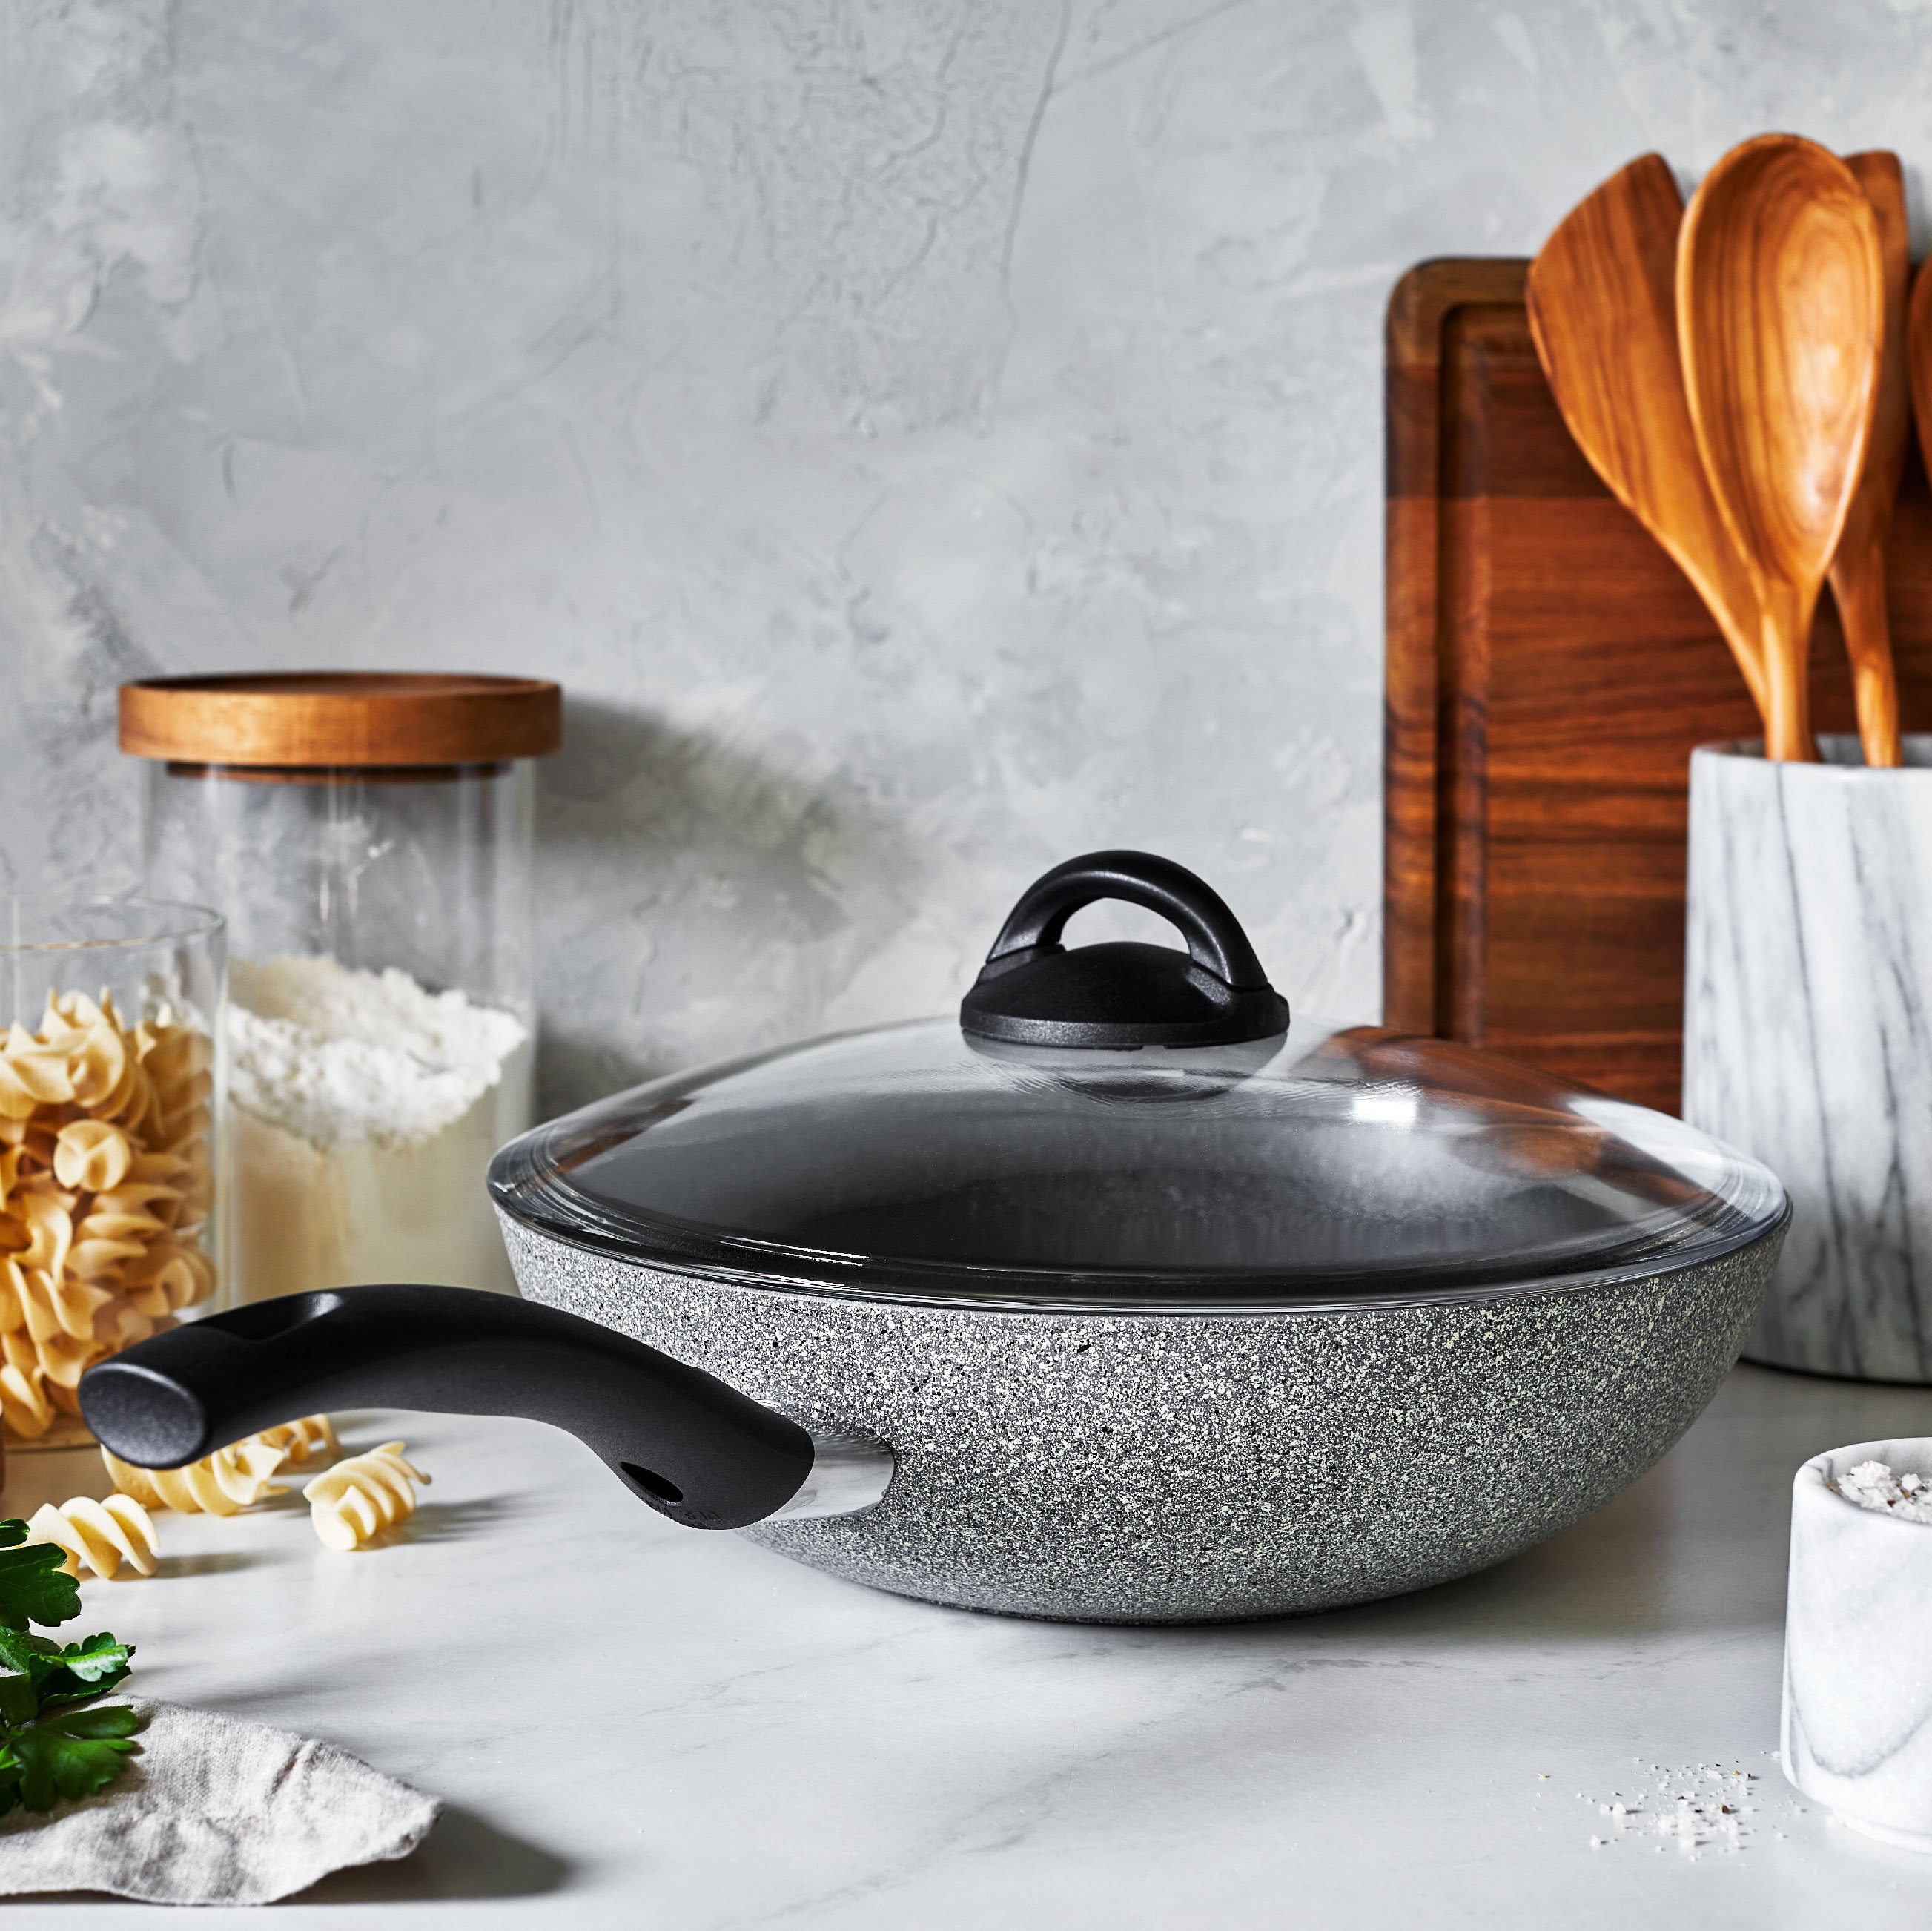 https://www.zwilling.com/on/demandware.static/-/Sites-zwilling-us-Library/default/dw8d395658/images/product-content/masonry-content/ballarini/cookware/parma/Ballerini_Parma_Masonry-03.jpg